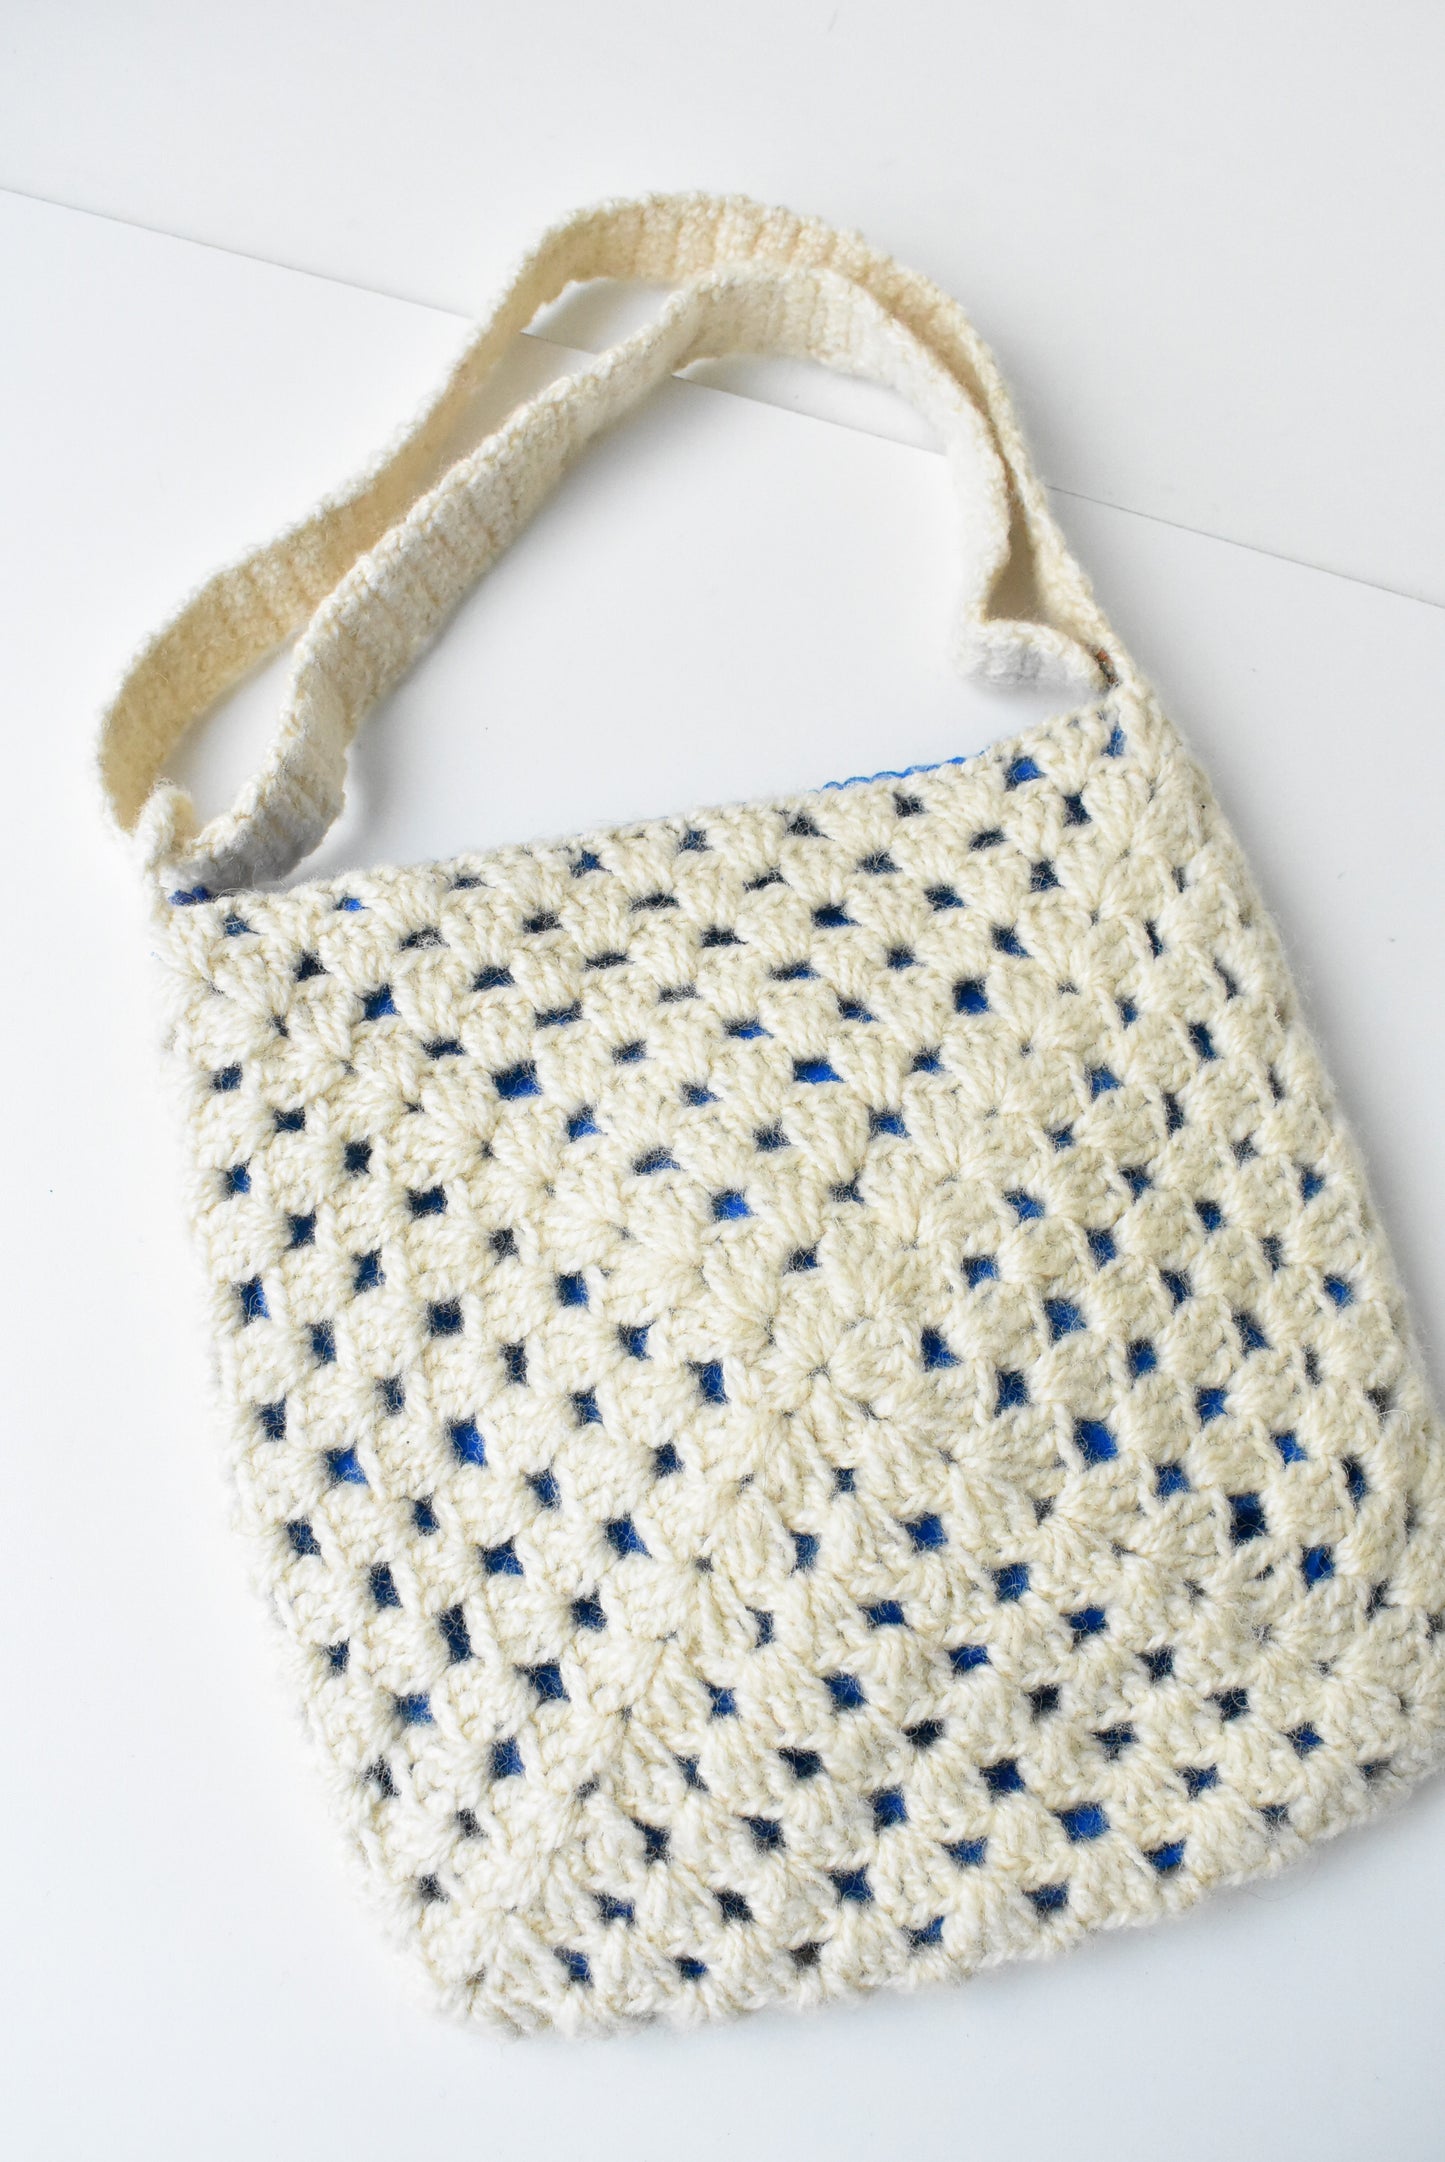 Handcrafted crochet bag with adjustable strap